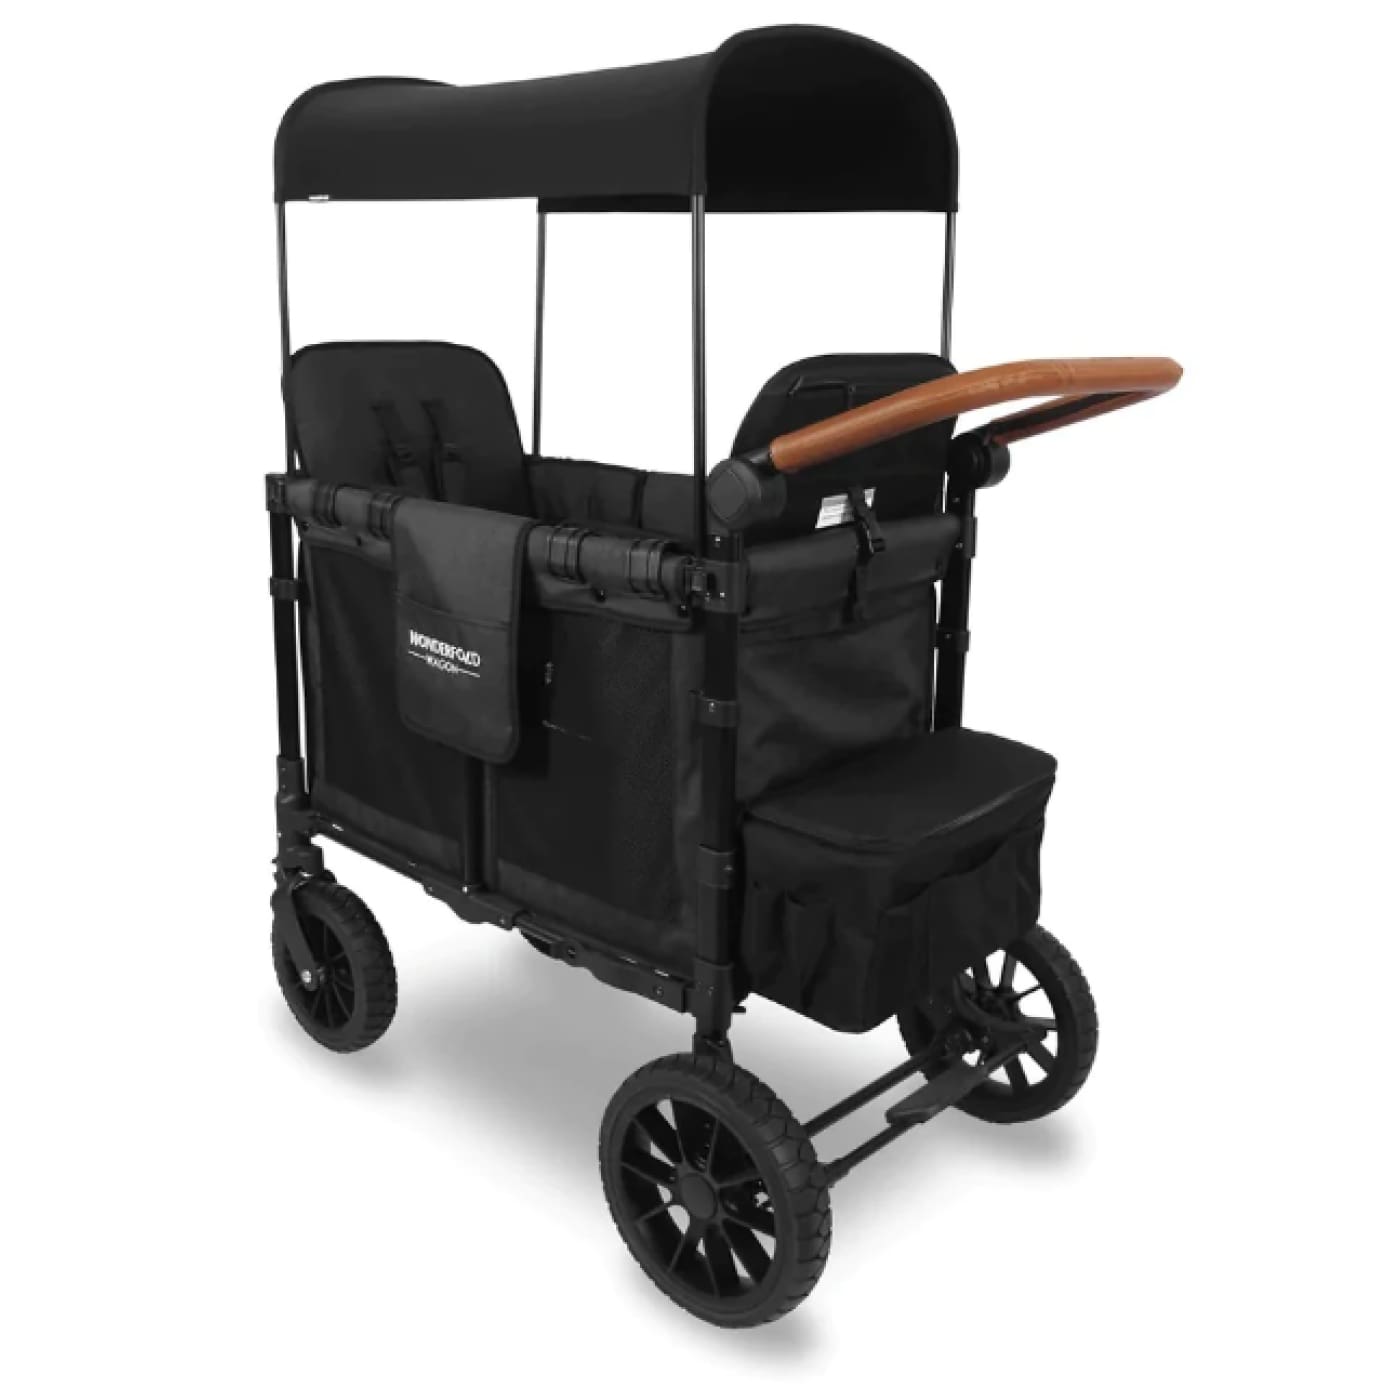 Wonderfold W2 Luxe Double Wagon Charcoal Grey with Black Frame - Charcoal Grey with Black Frame - PRAMS & STROLLERS - WAGONS